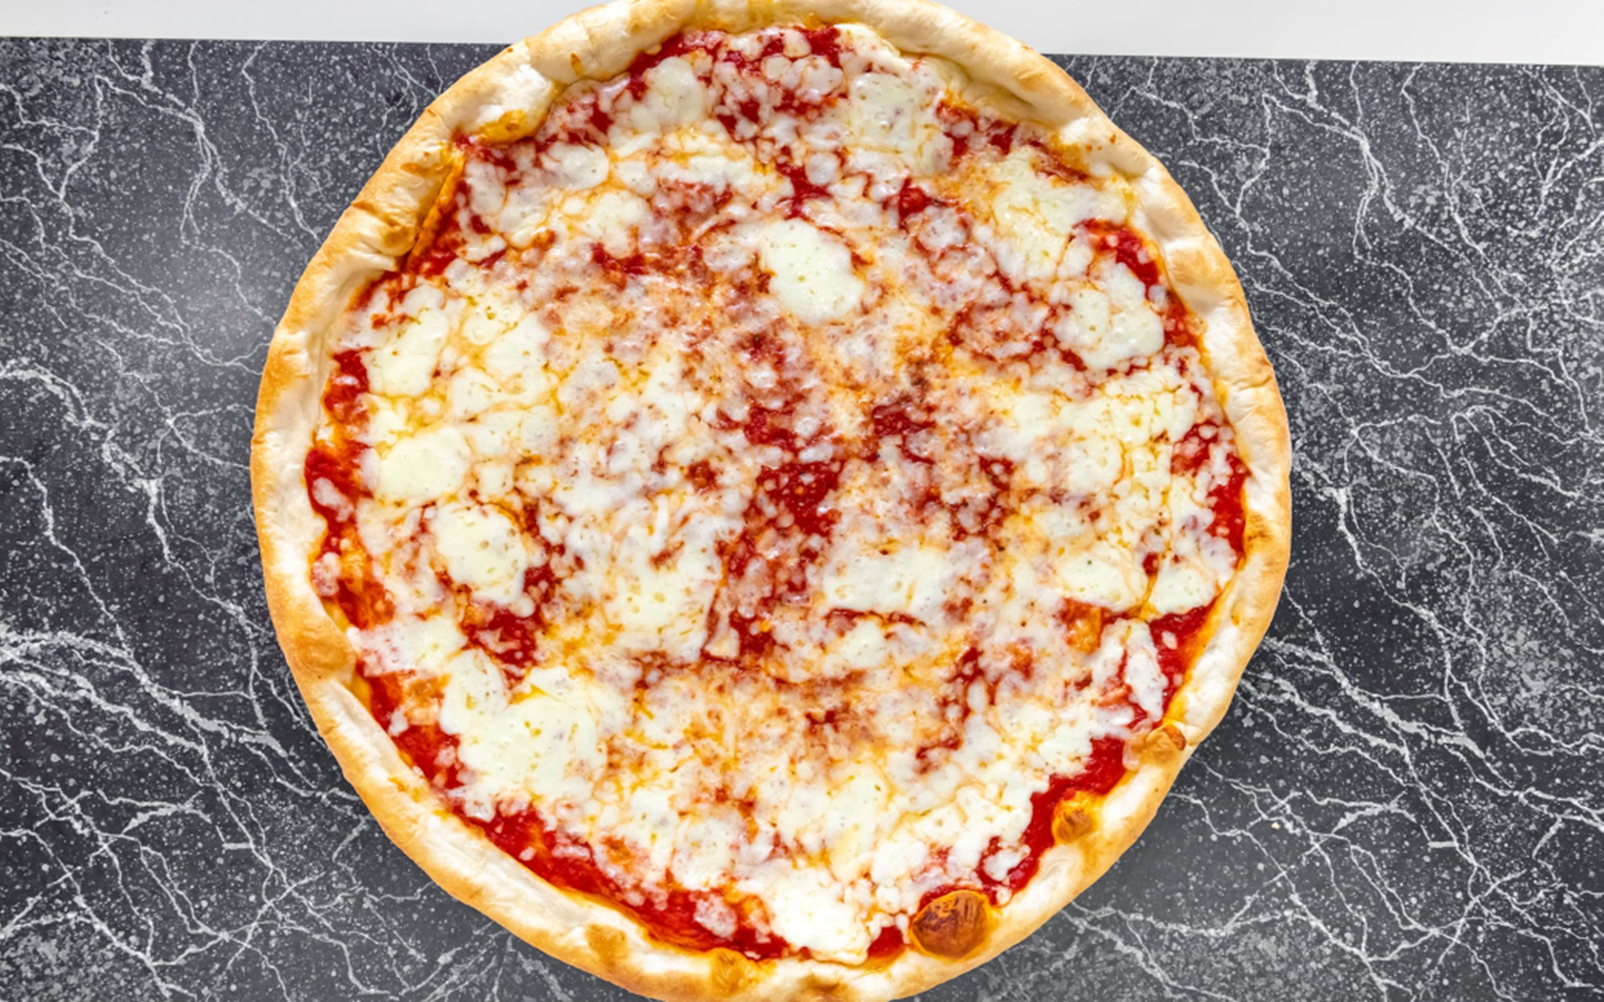 A freshly baked cheese pizza with a golden crust on a marble surface.